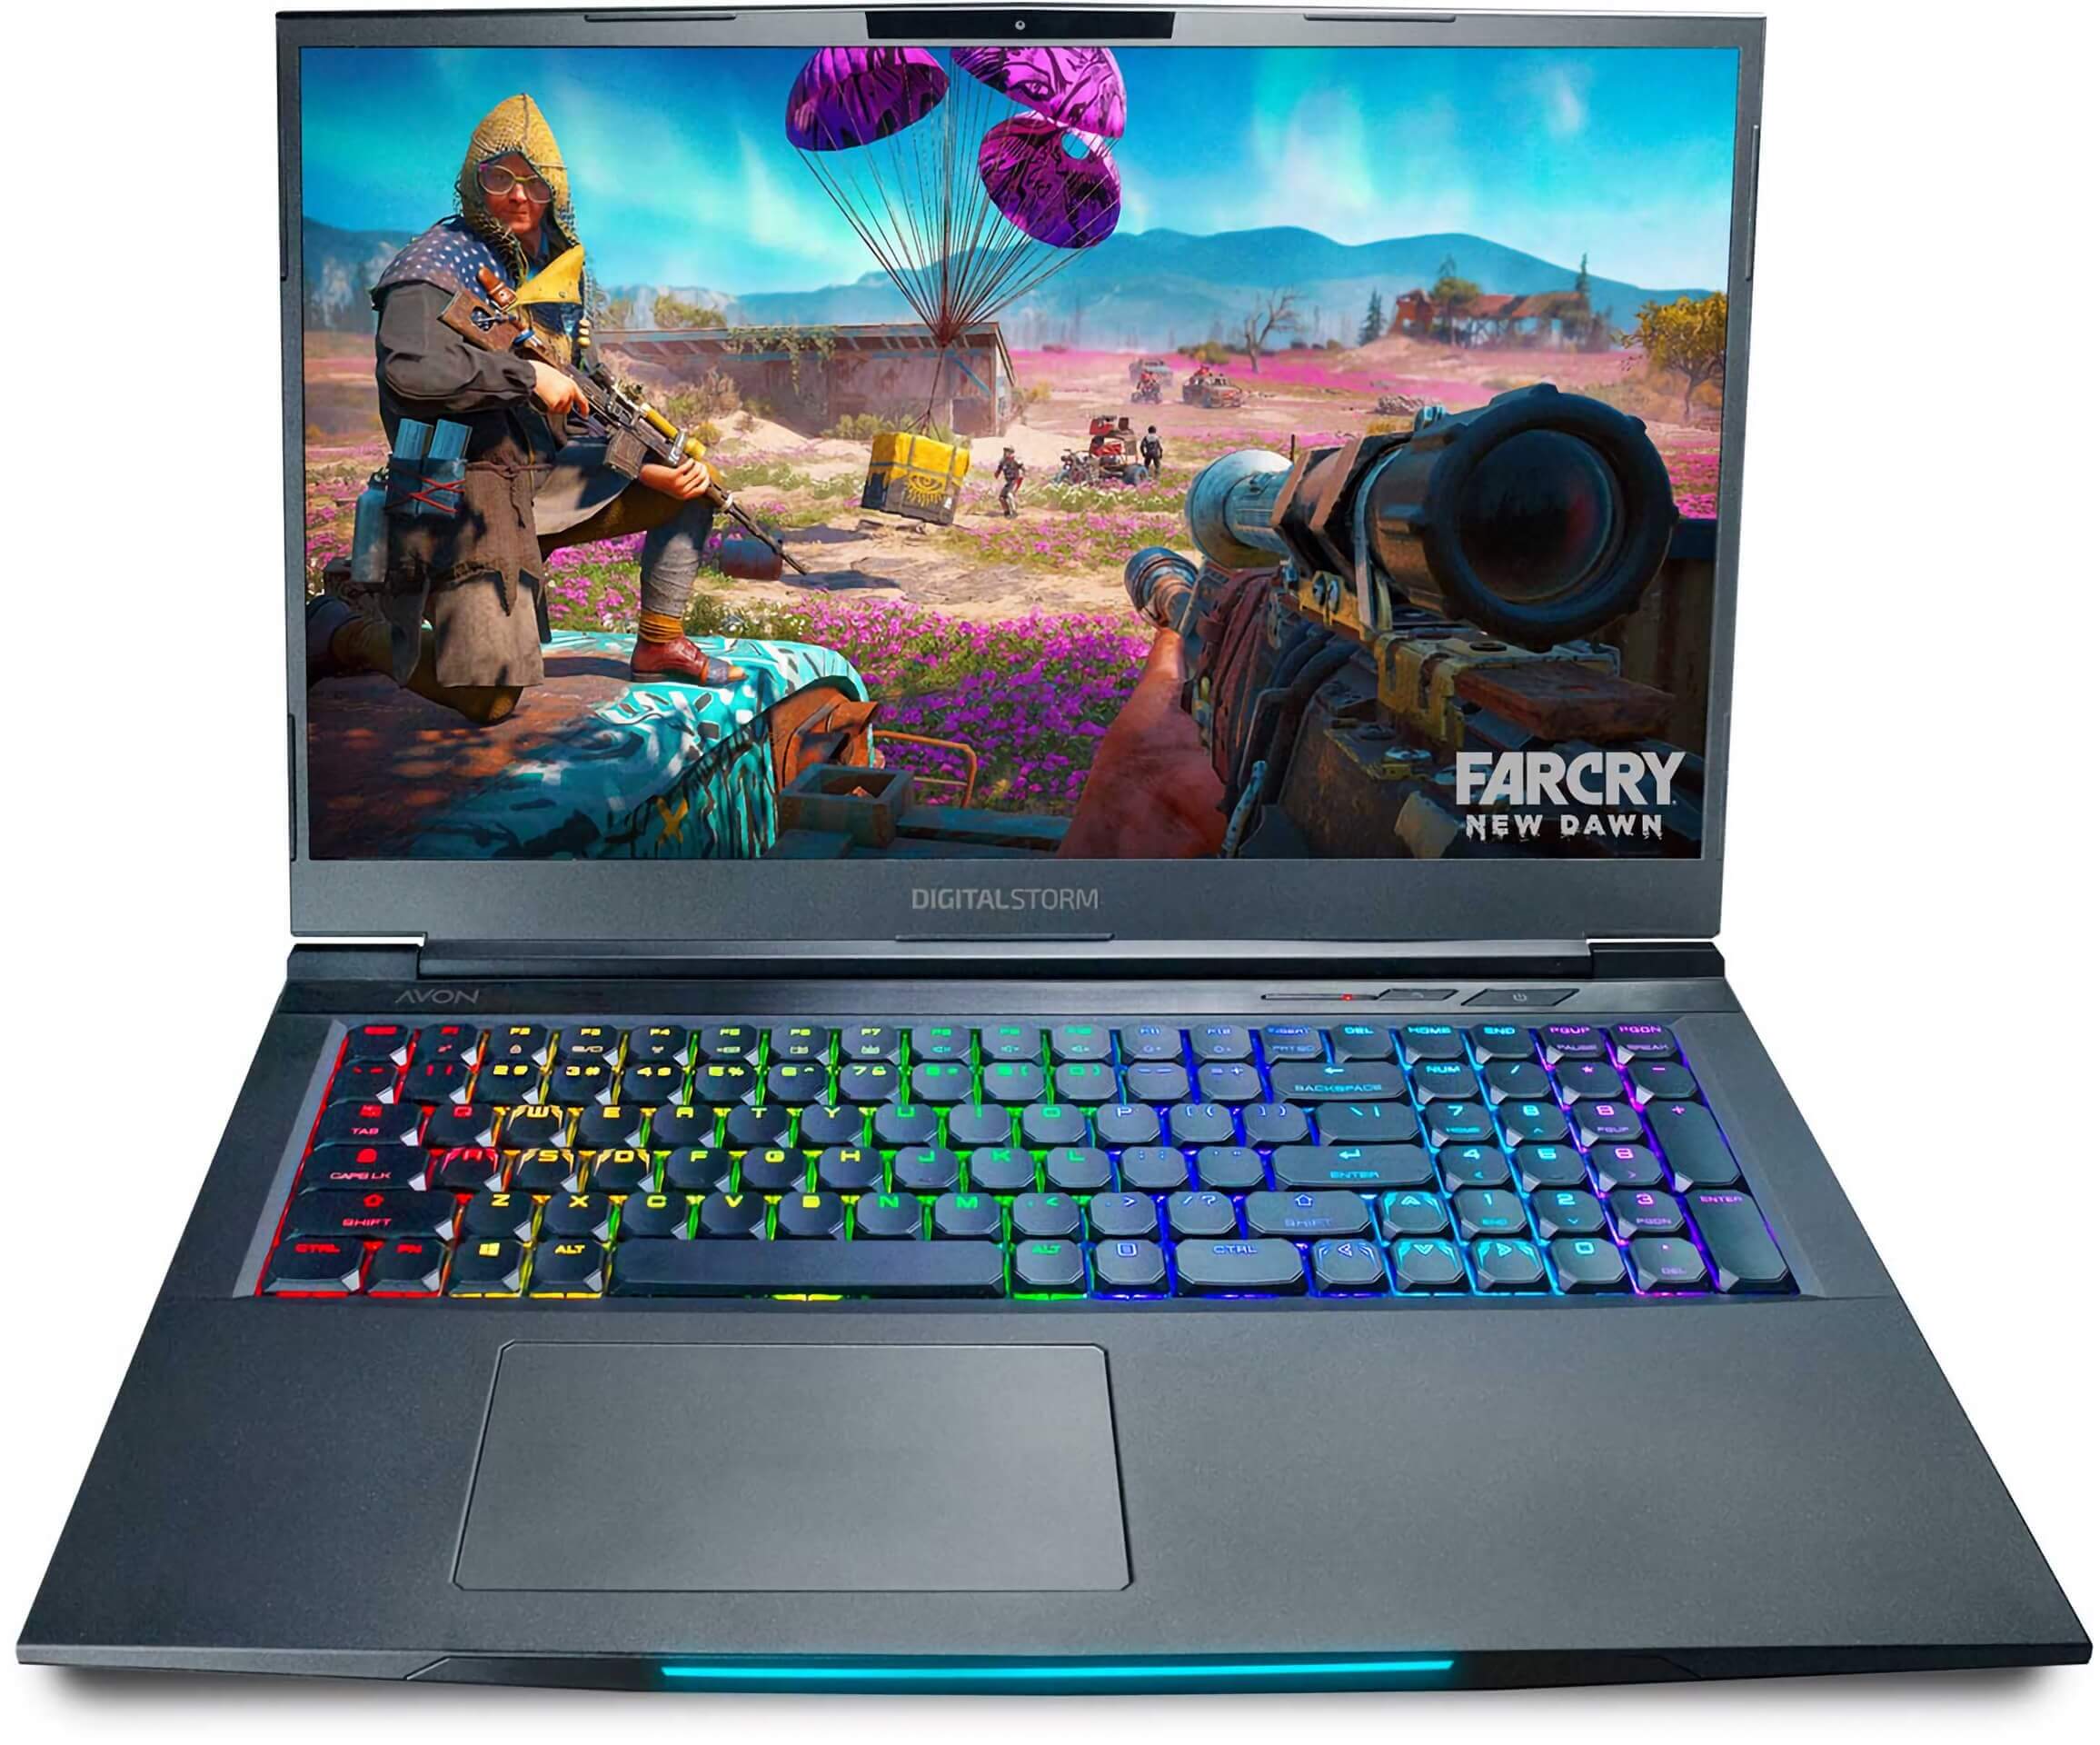 Intel Core i7-9750H makes an appearance in Digital Storm's latest gaming laptops